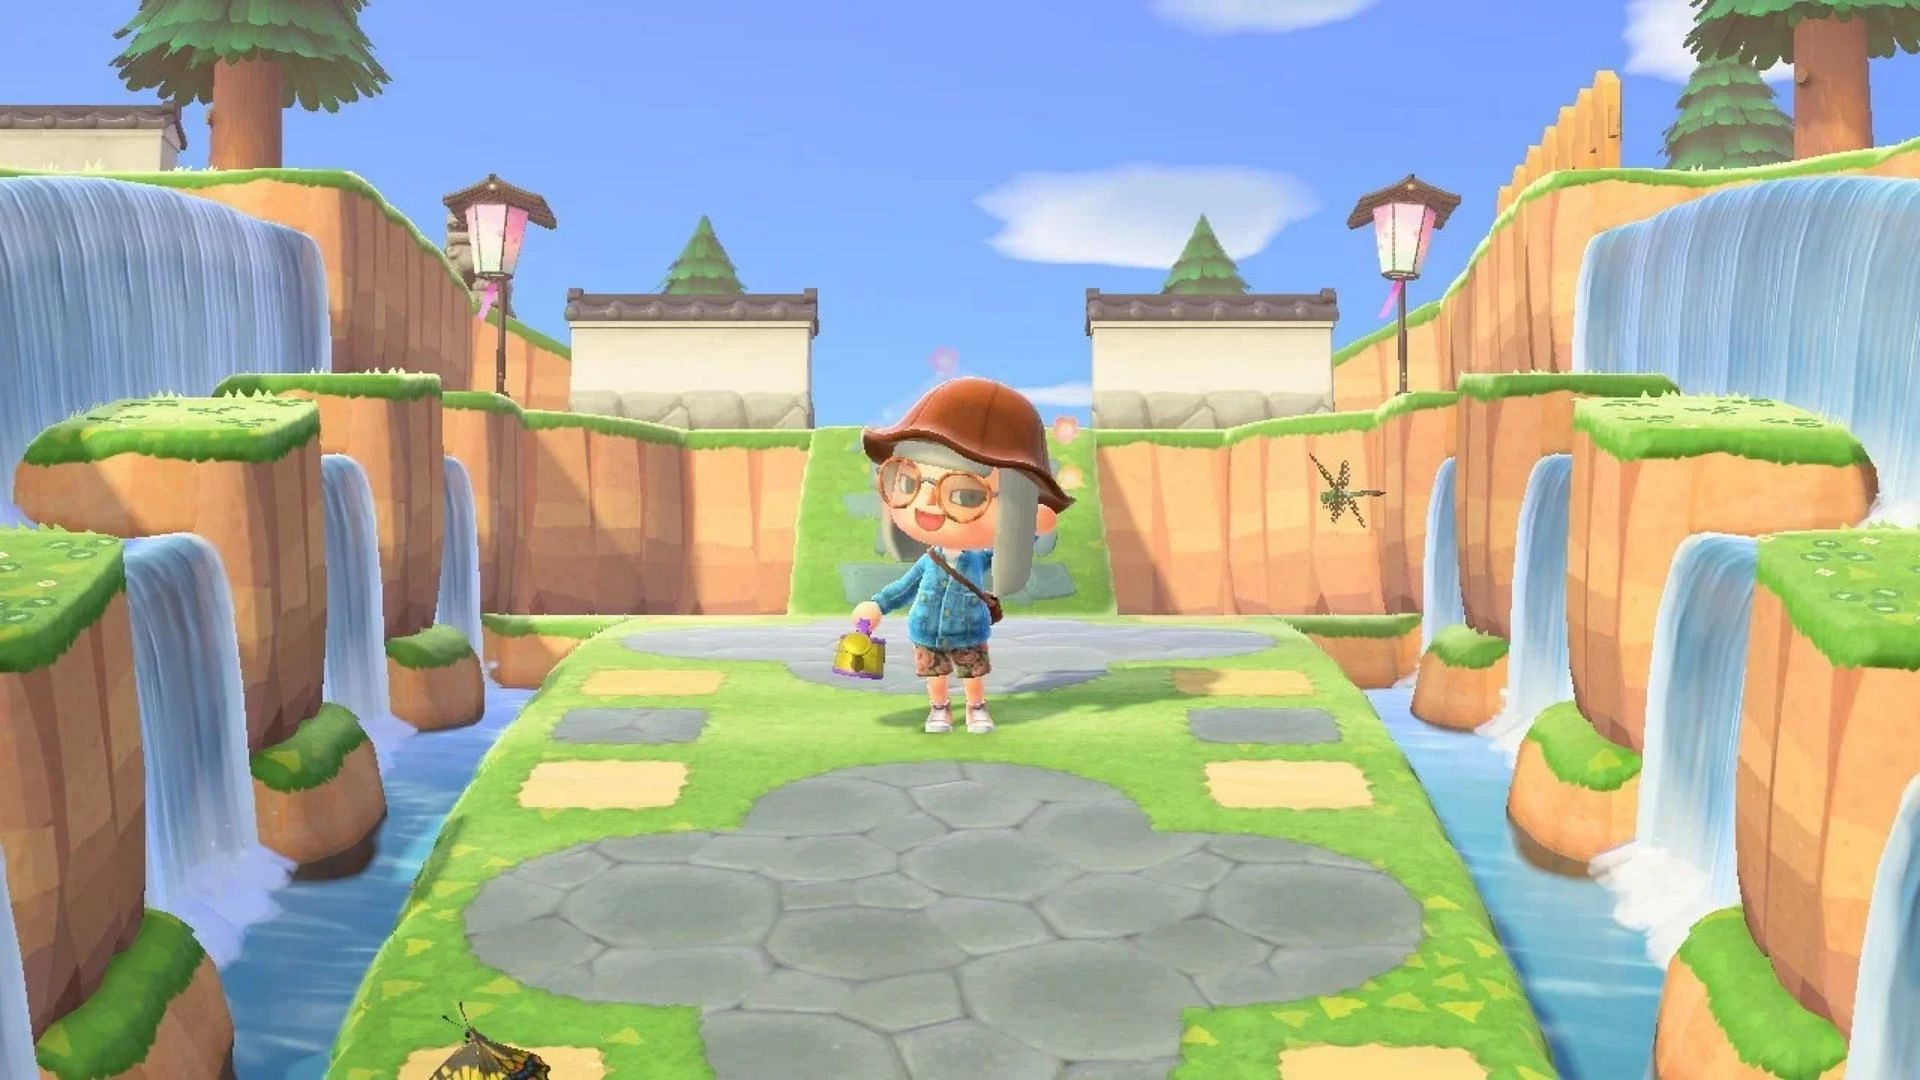 Animal Crossing: New Horizons has several glitches that players can try out in the game (Image via Nintendo Life)